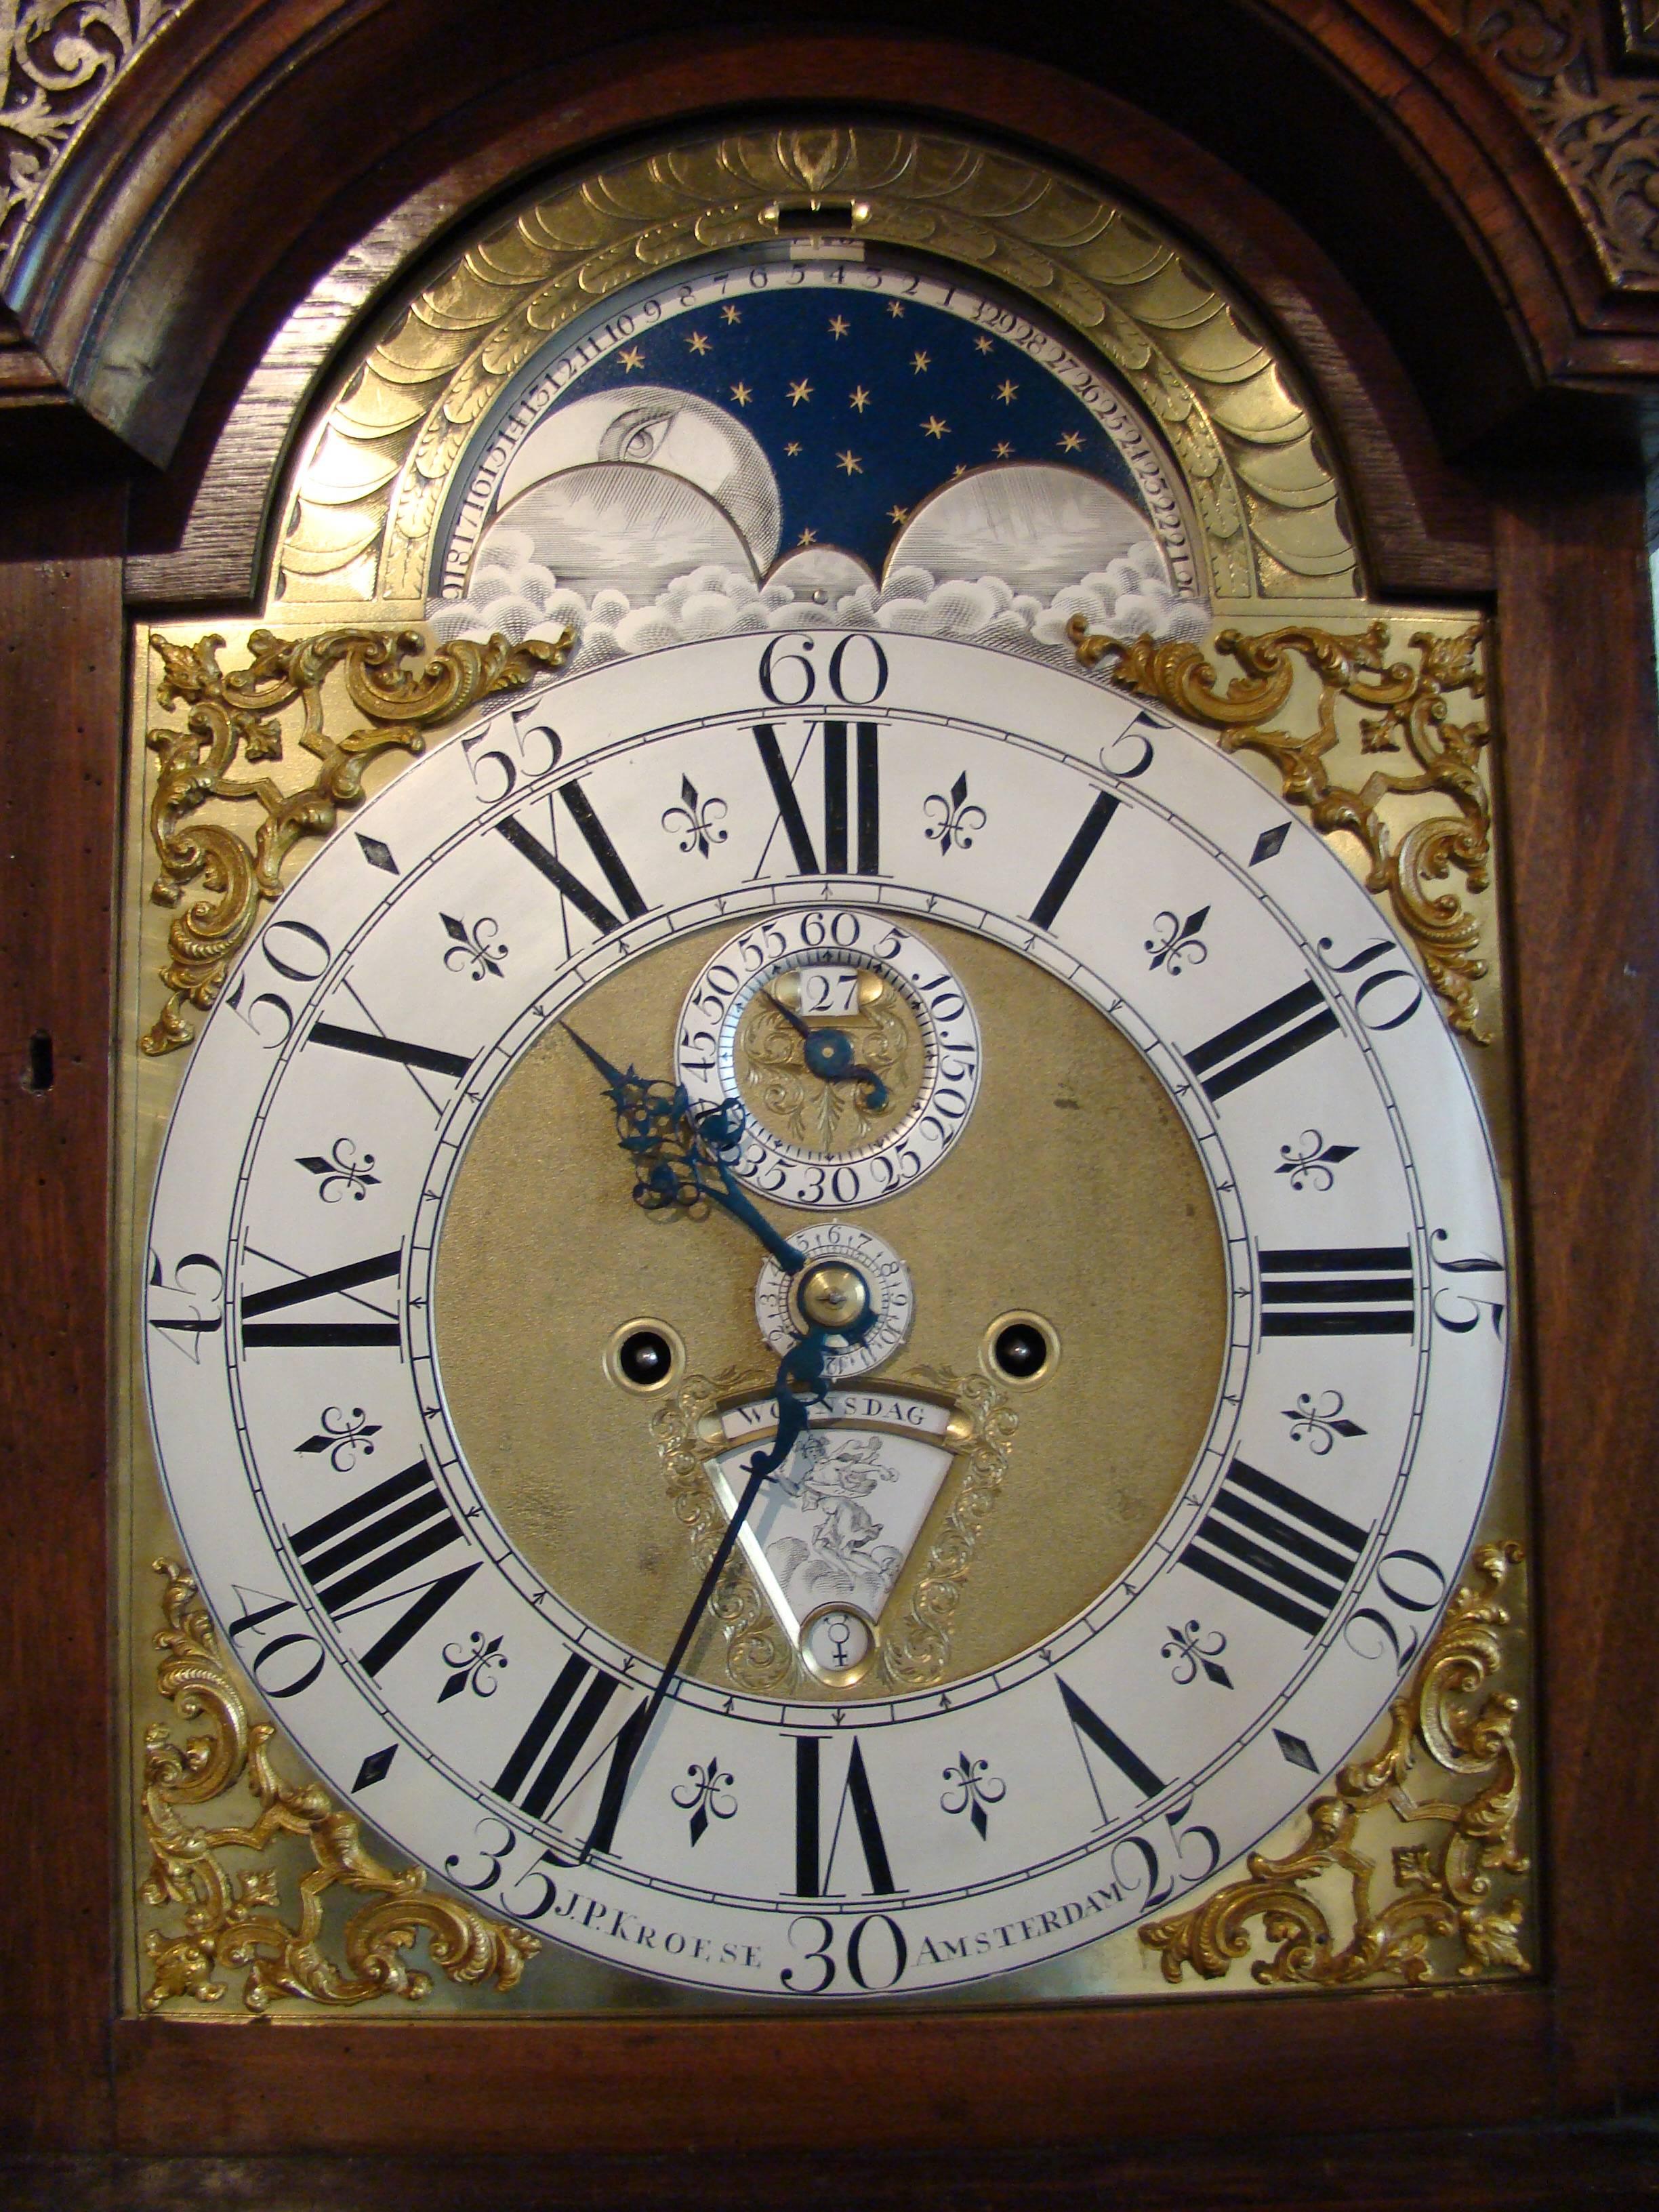 A fine Dutch burr walnut striking longcase clock J P Kroese, Amsterdam, circa 1730
arched brass dial with silvered engraved chapter ring with Roman numerals and half-quarter marks signed J.P. Kroese Amsterdam, pierced blued hands and silvered alarm